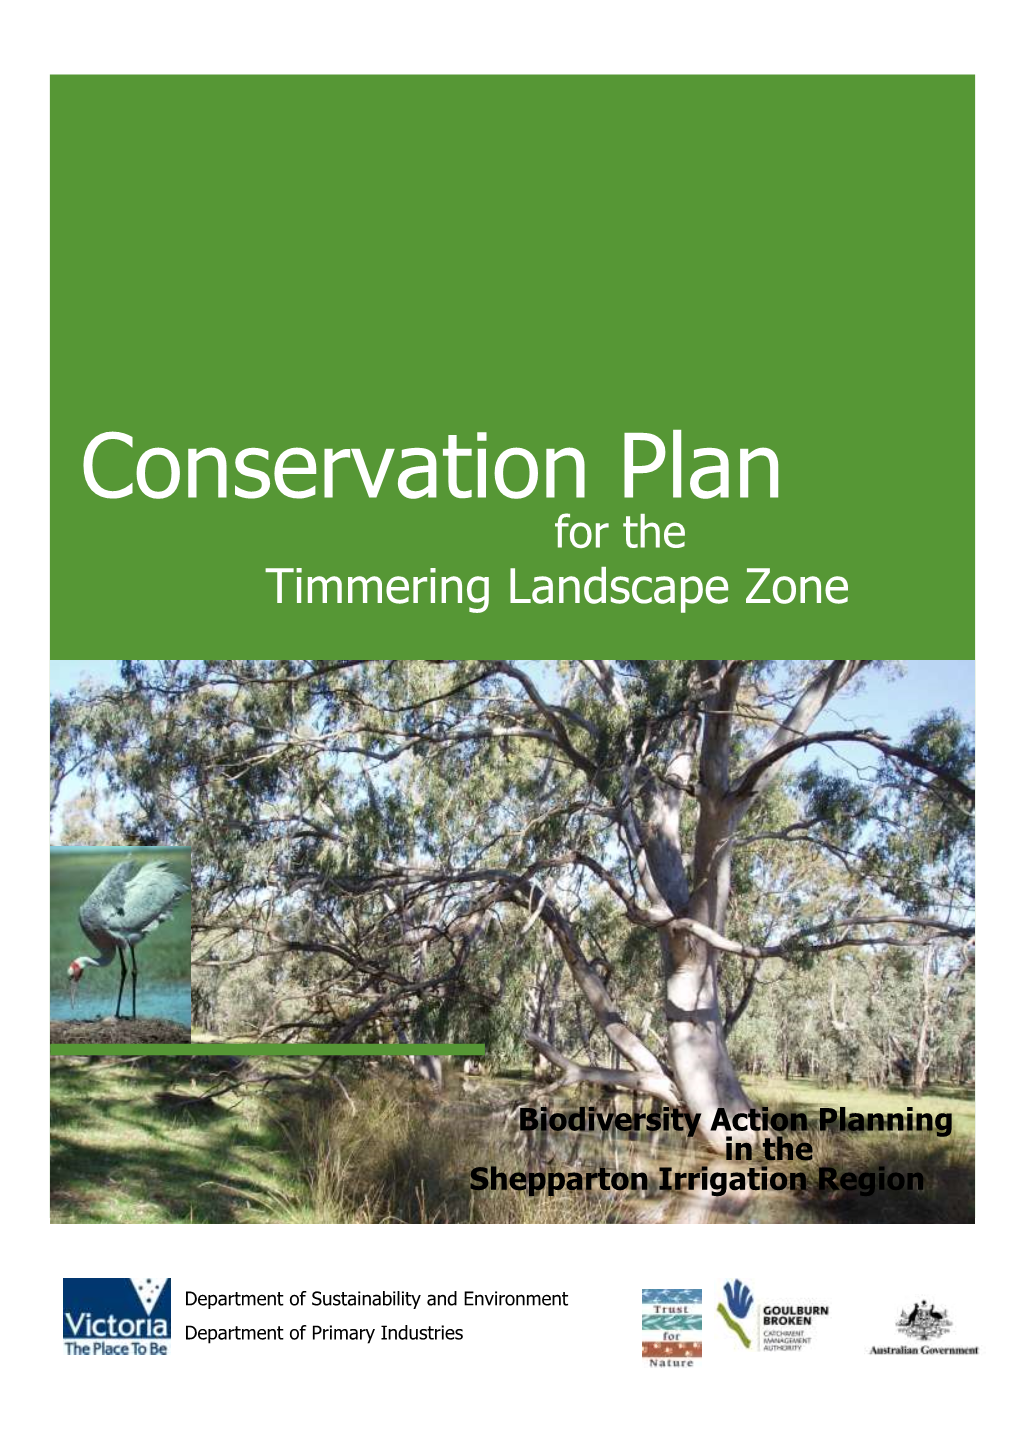 Conservation Plan for the Timmering Landscape Zone